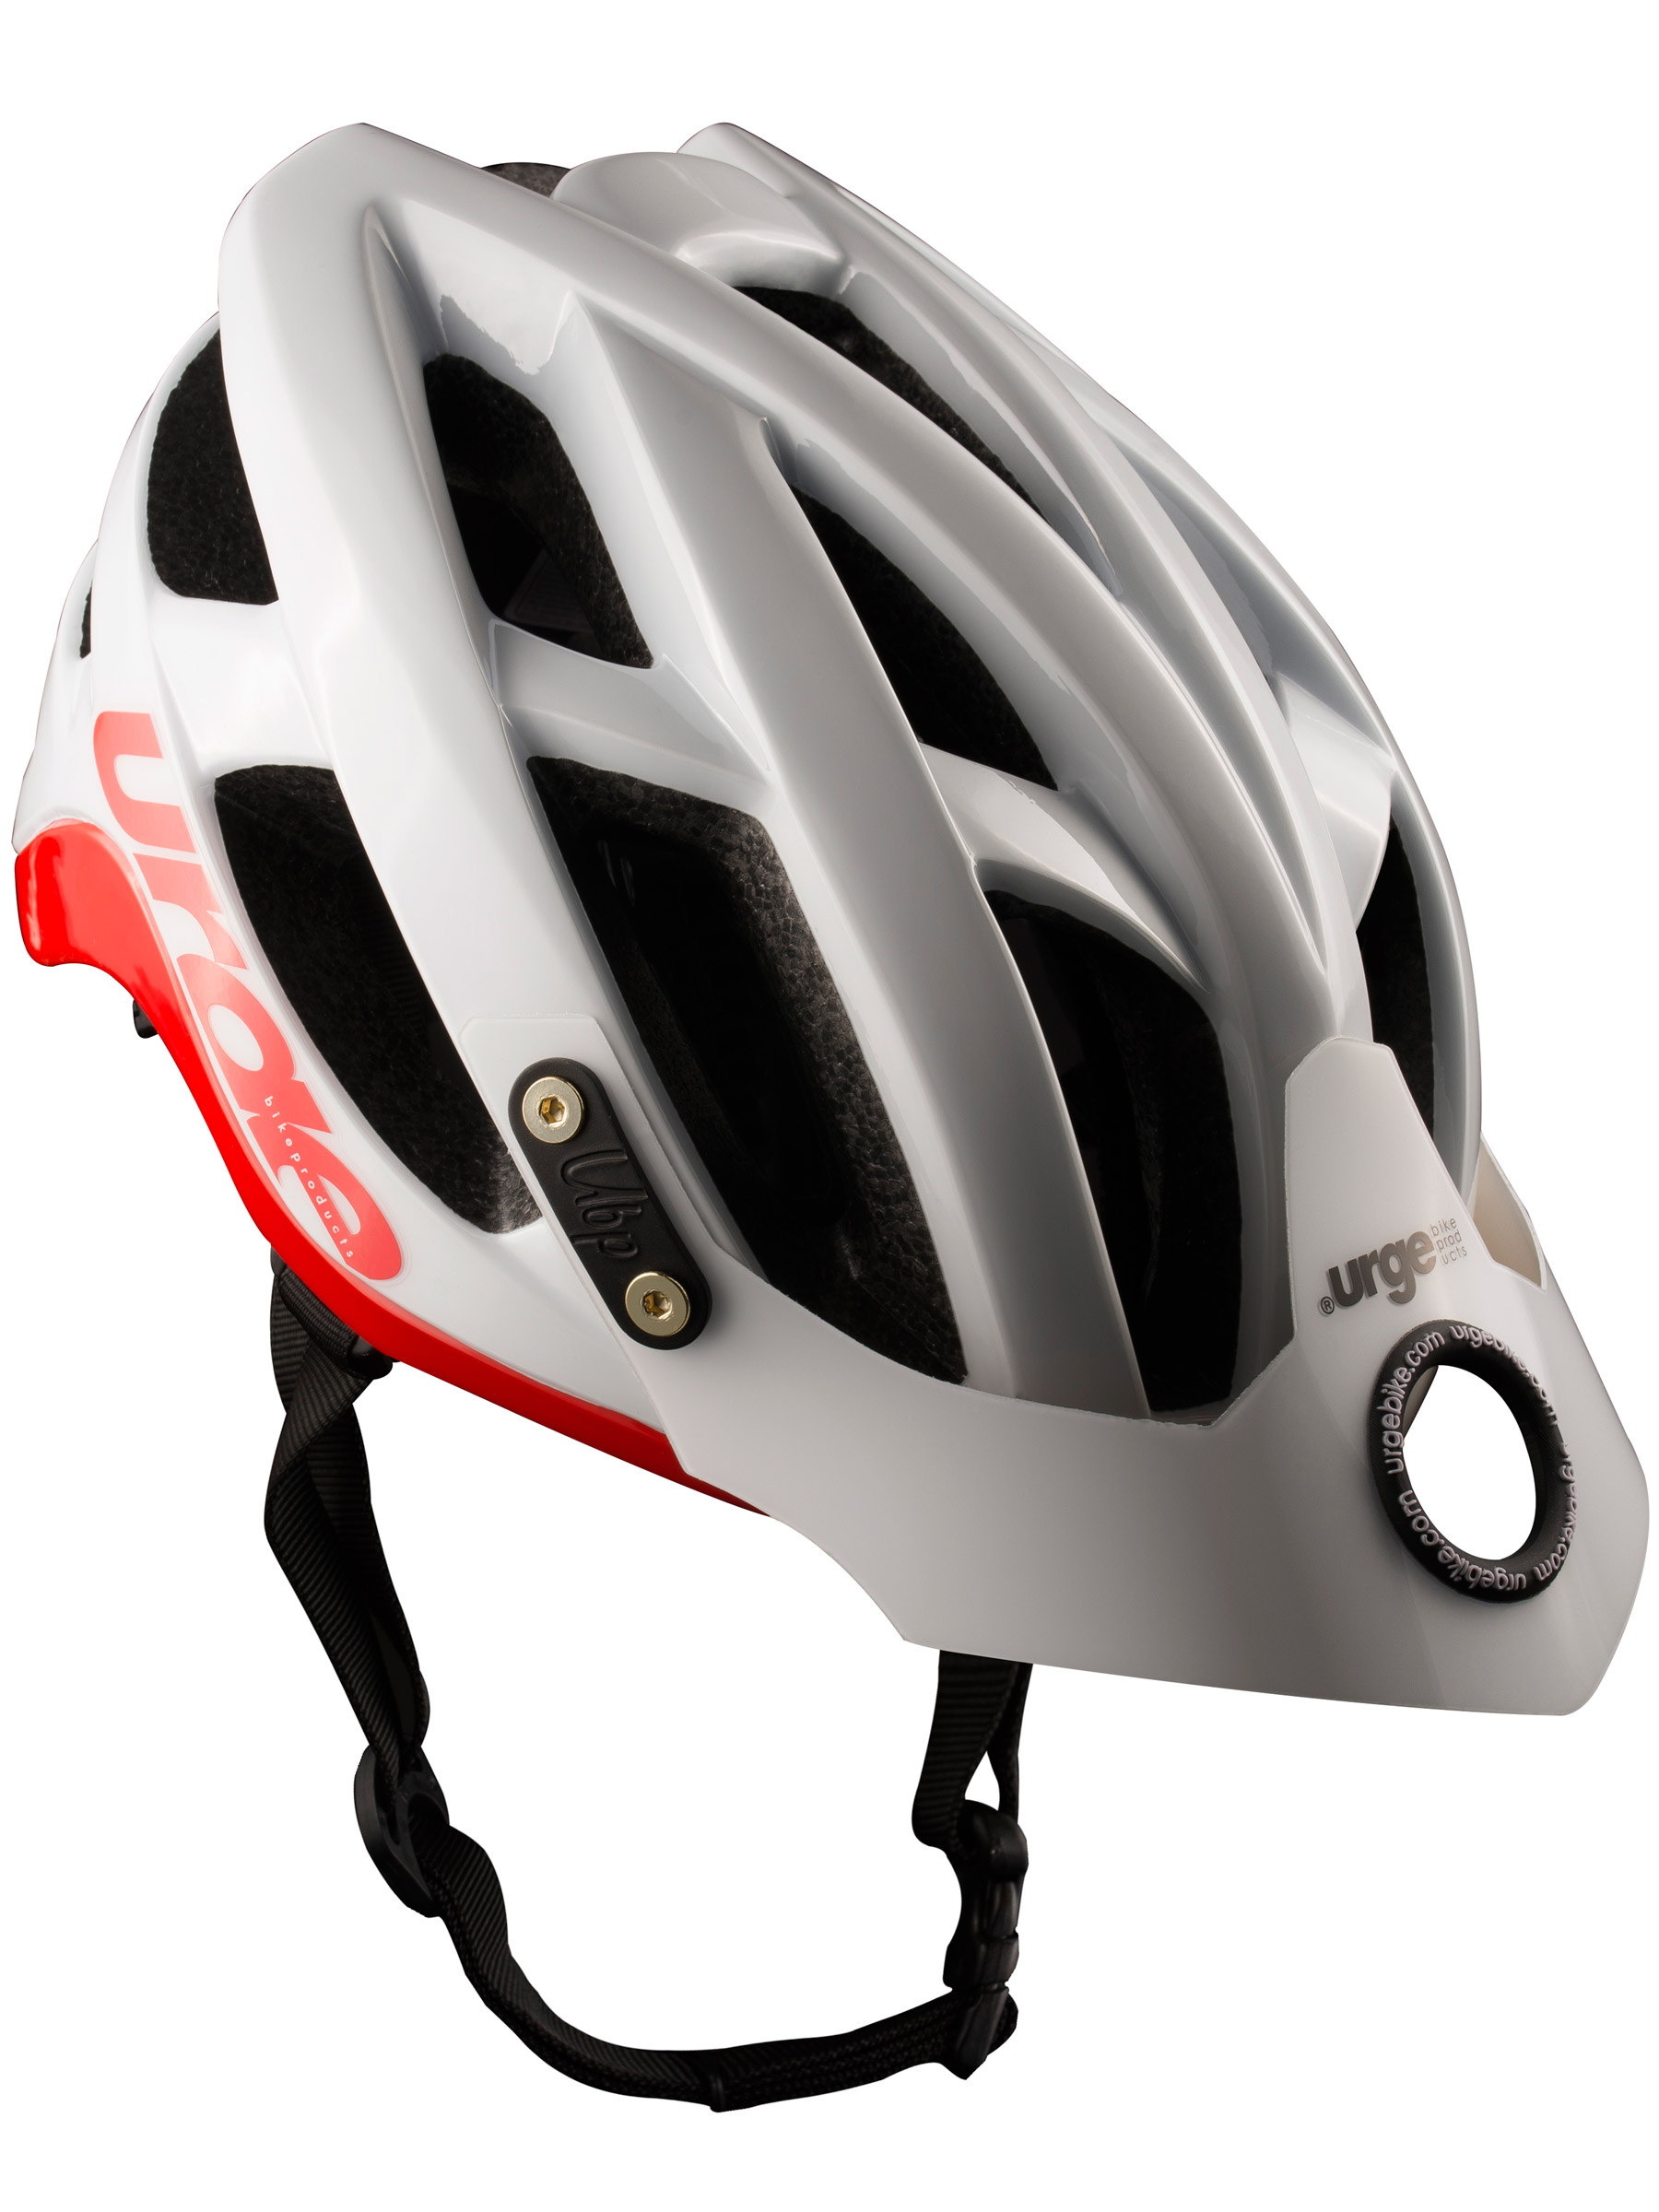 Urge has you covered with affordable SeriAll all-mountain helmet